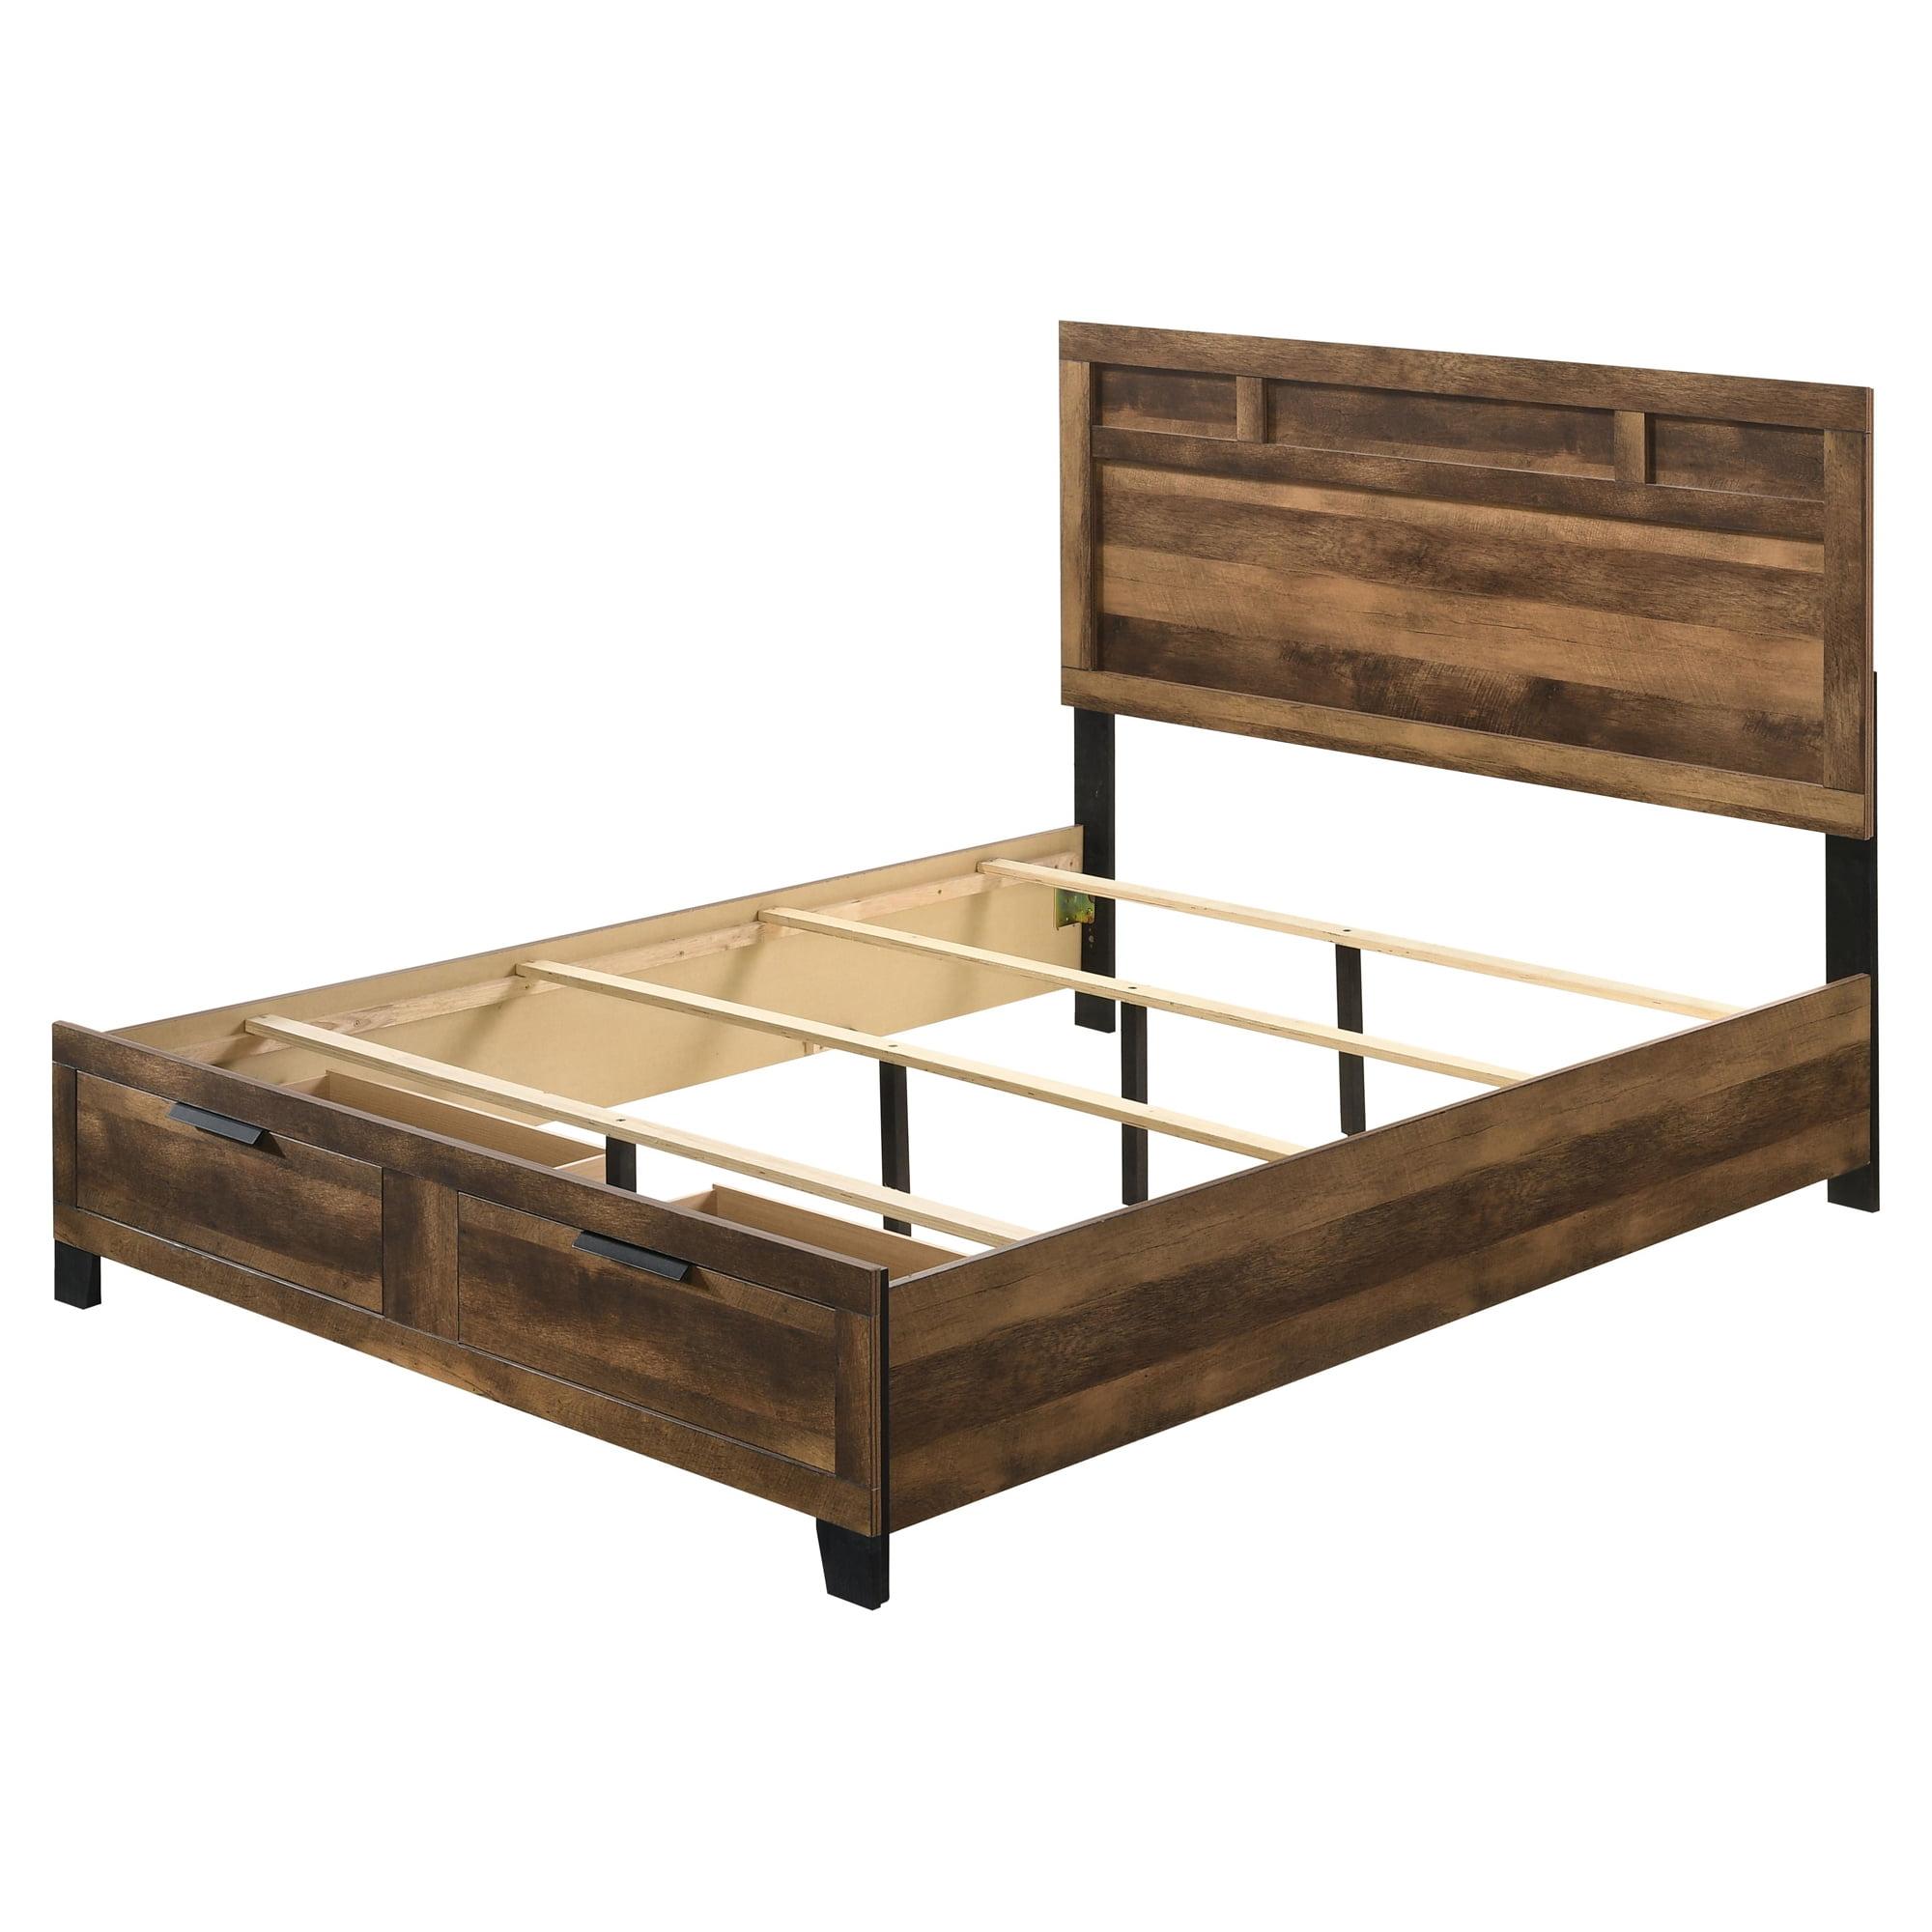 Rustic Oak Queen Storage Bed with 2 Drawers and Wood Headboard